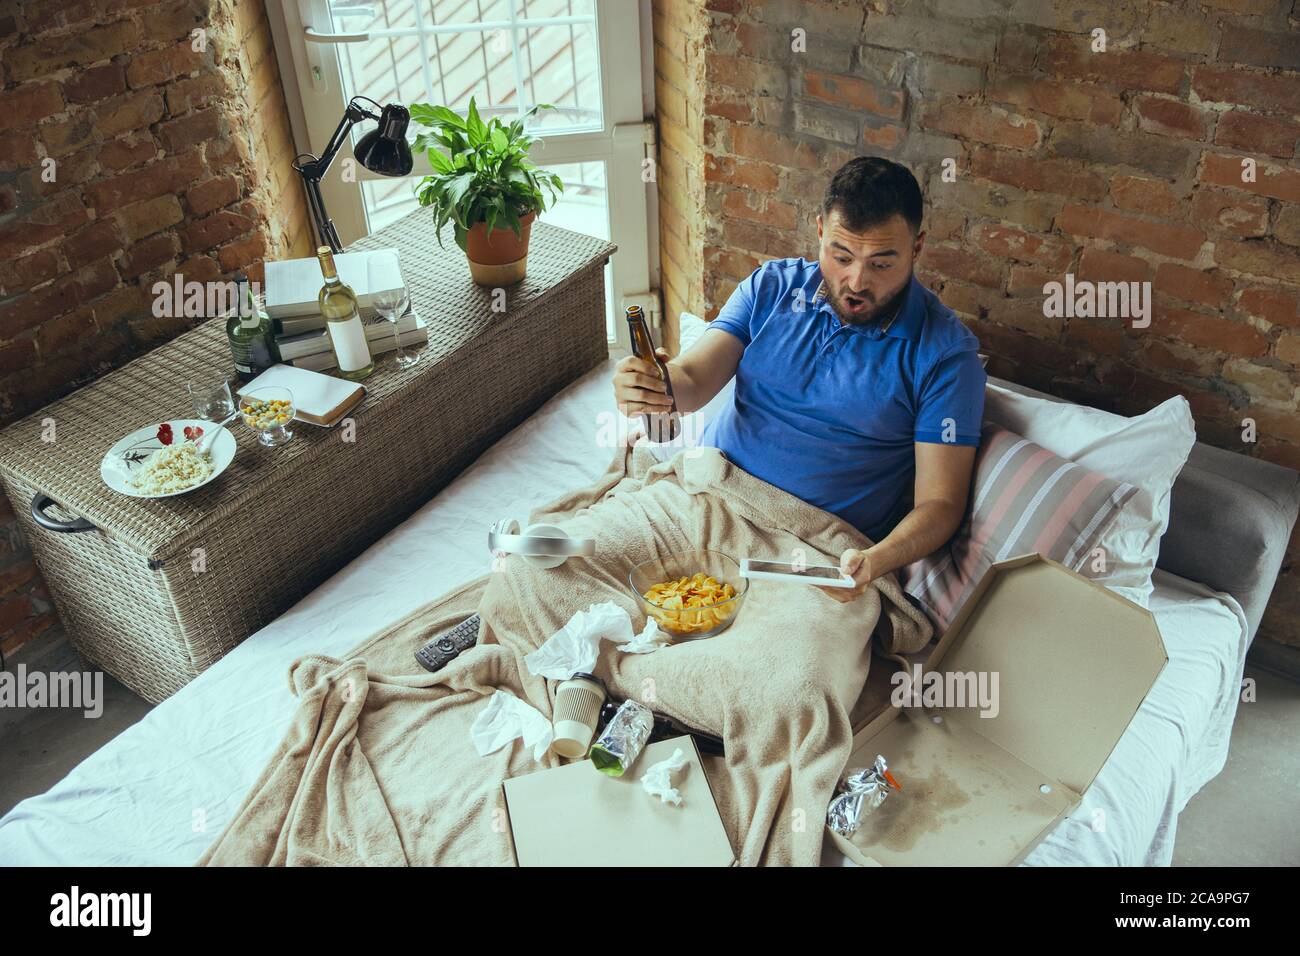 Excited cheering of favourite sport team, drinks beer. Lazy man living in his bed surrounded with messy. No need to go out to be happy. Using gadgets, watching movie and series, emotional. Fast food. Stock Photo